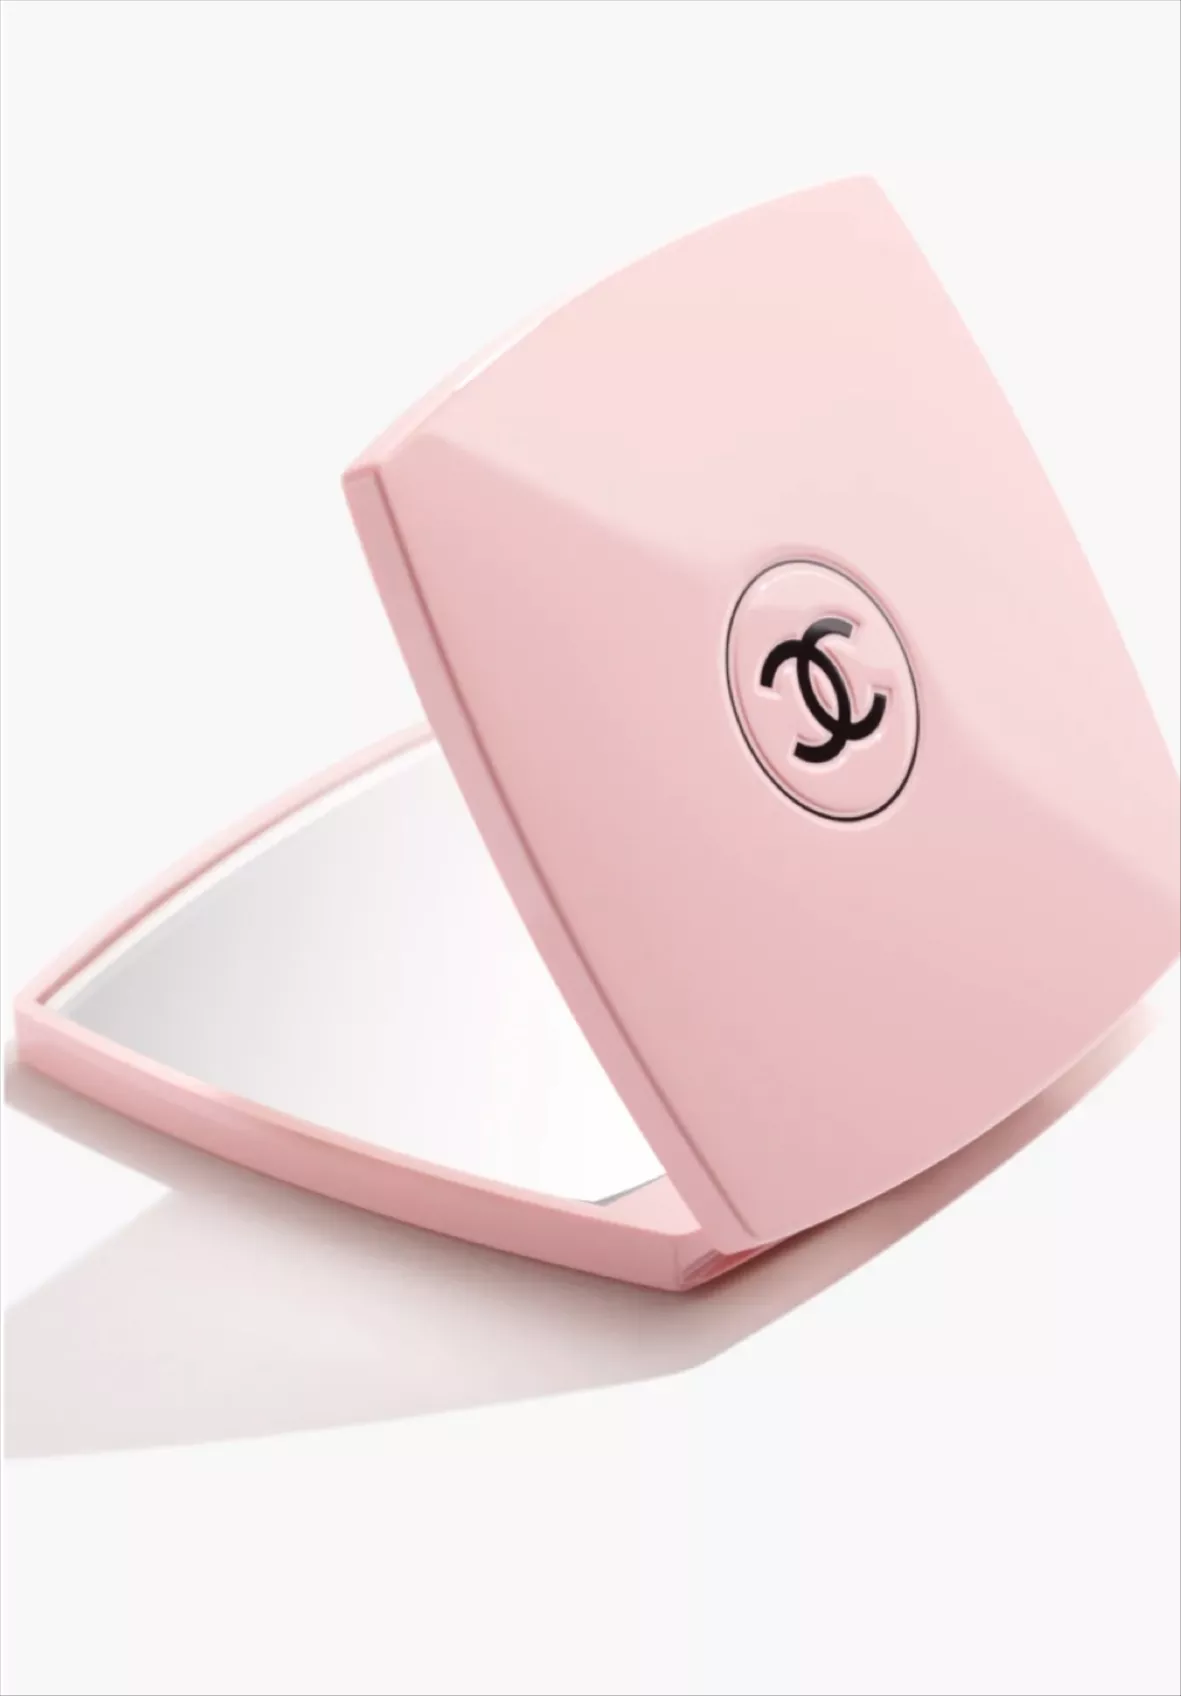 Which Chanel Bag Is The Cheapest & Tips For Saving Money On Chanel Bags -  Fashion For Lunch.